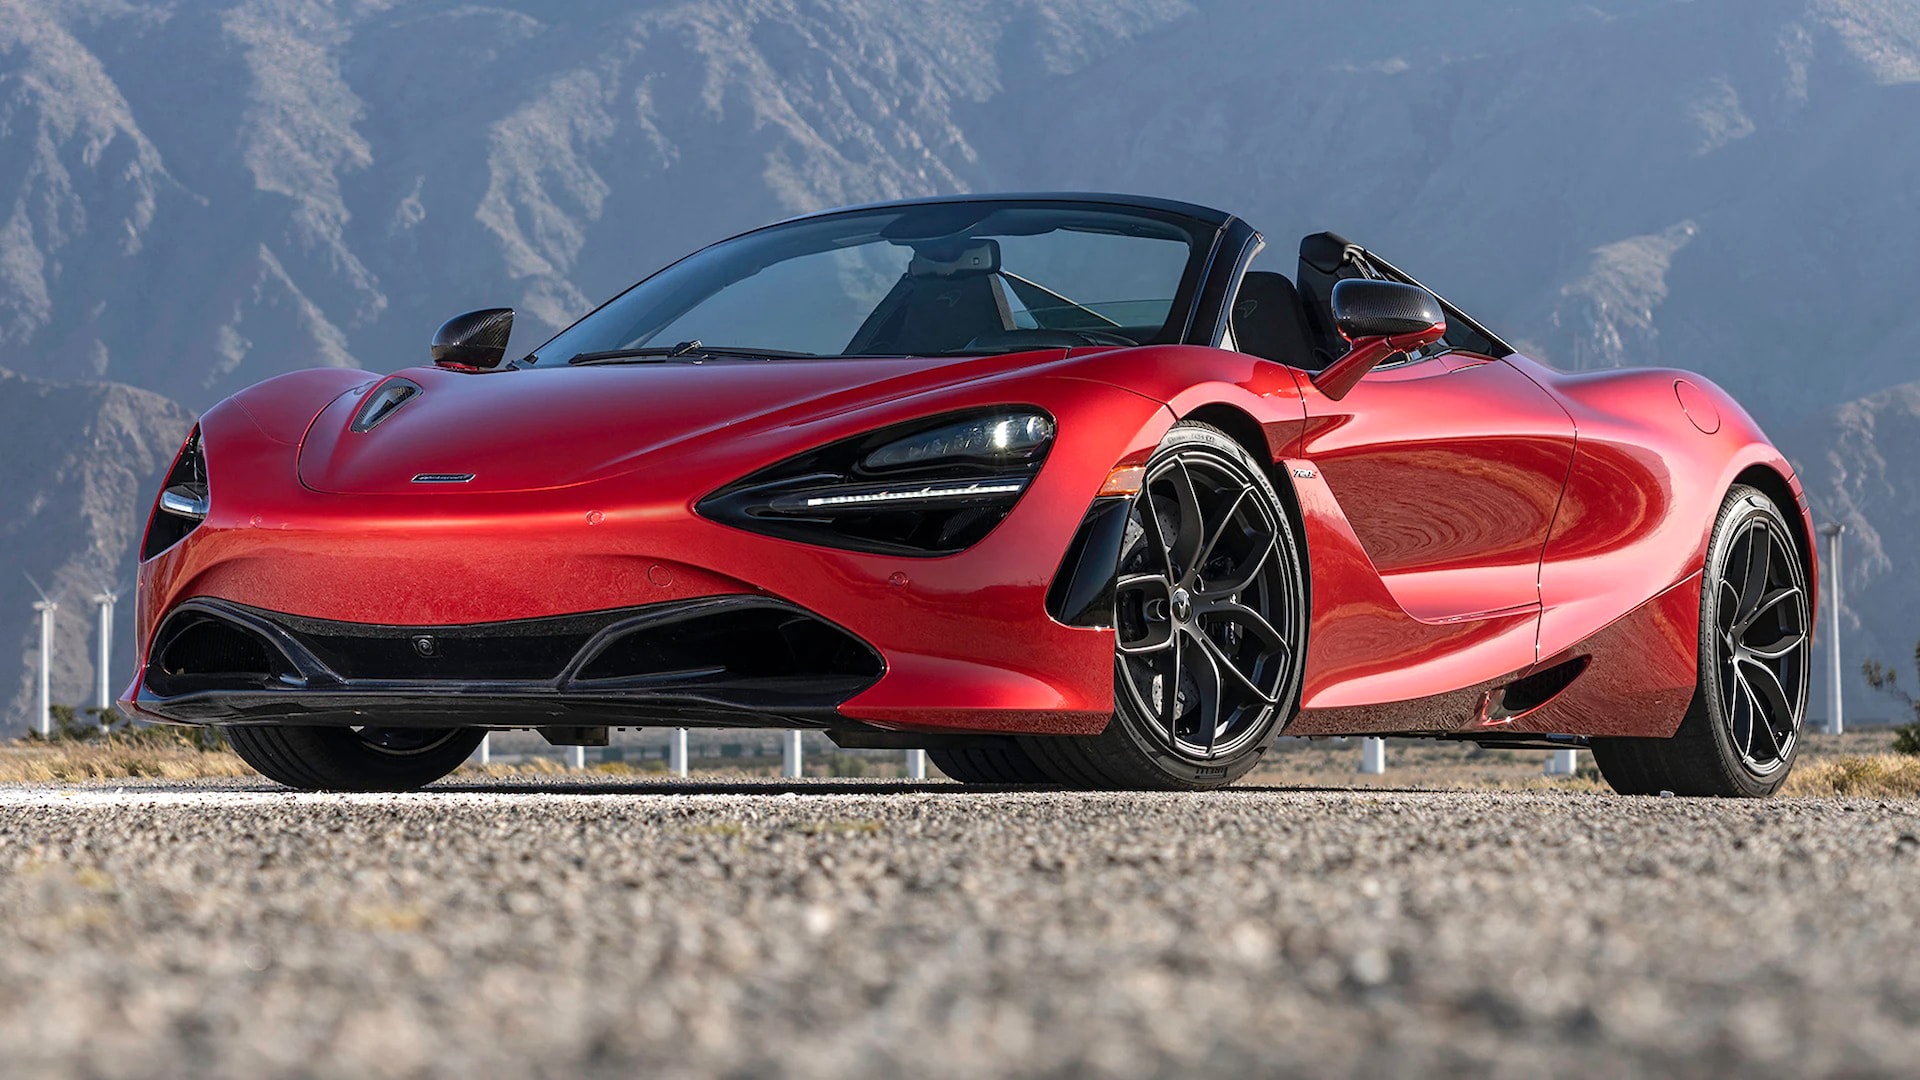 2023 McLaren 720S Prices, Reviews, and Photos - MotorTrend